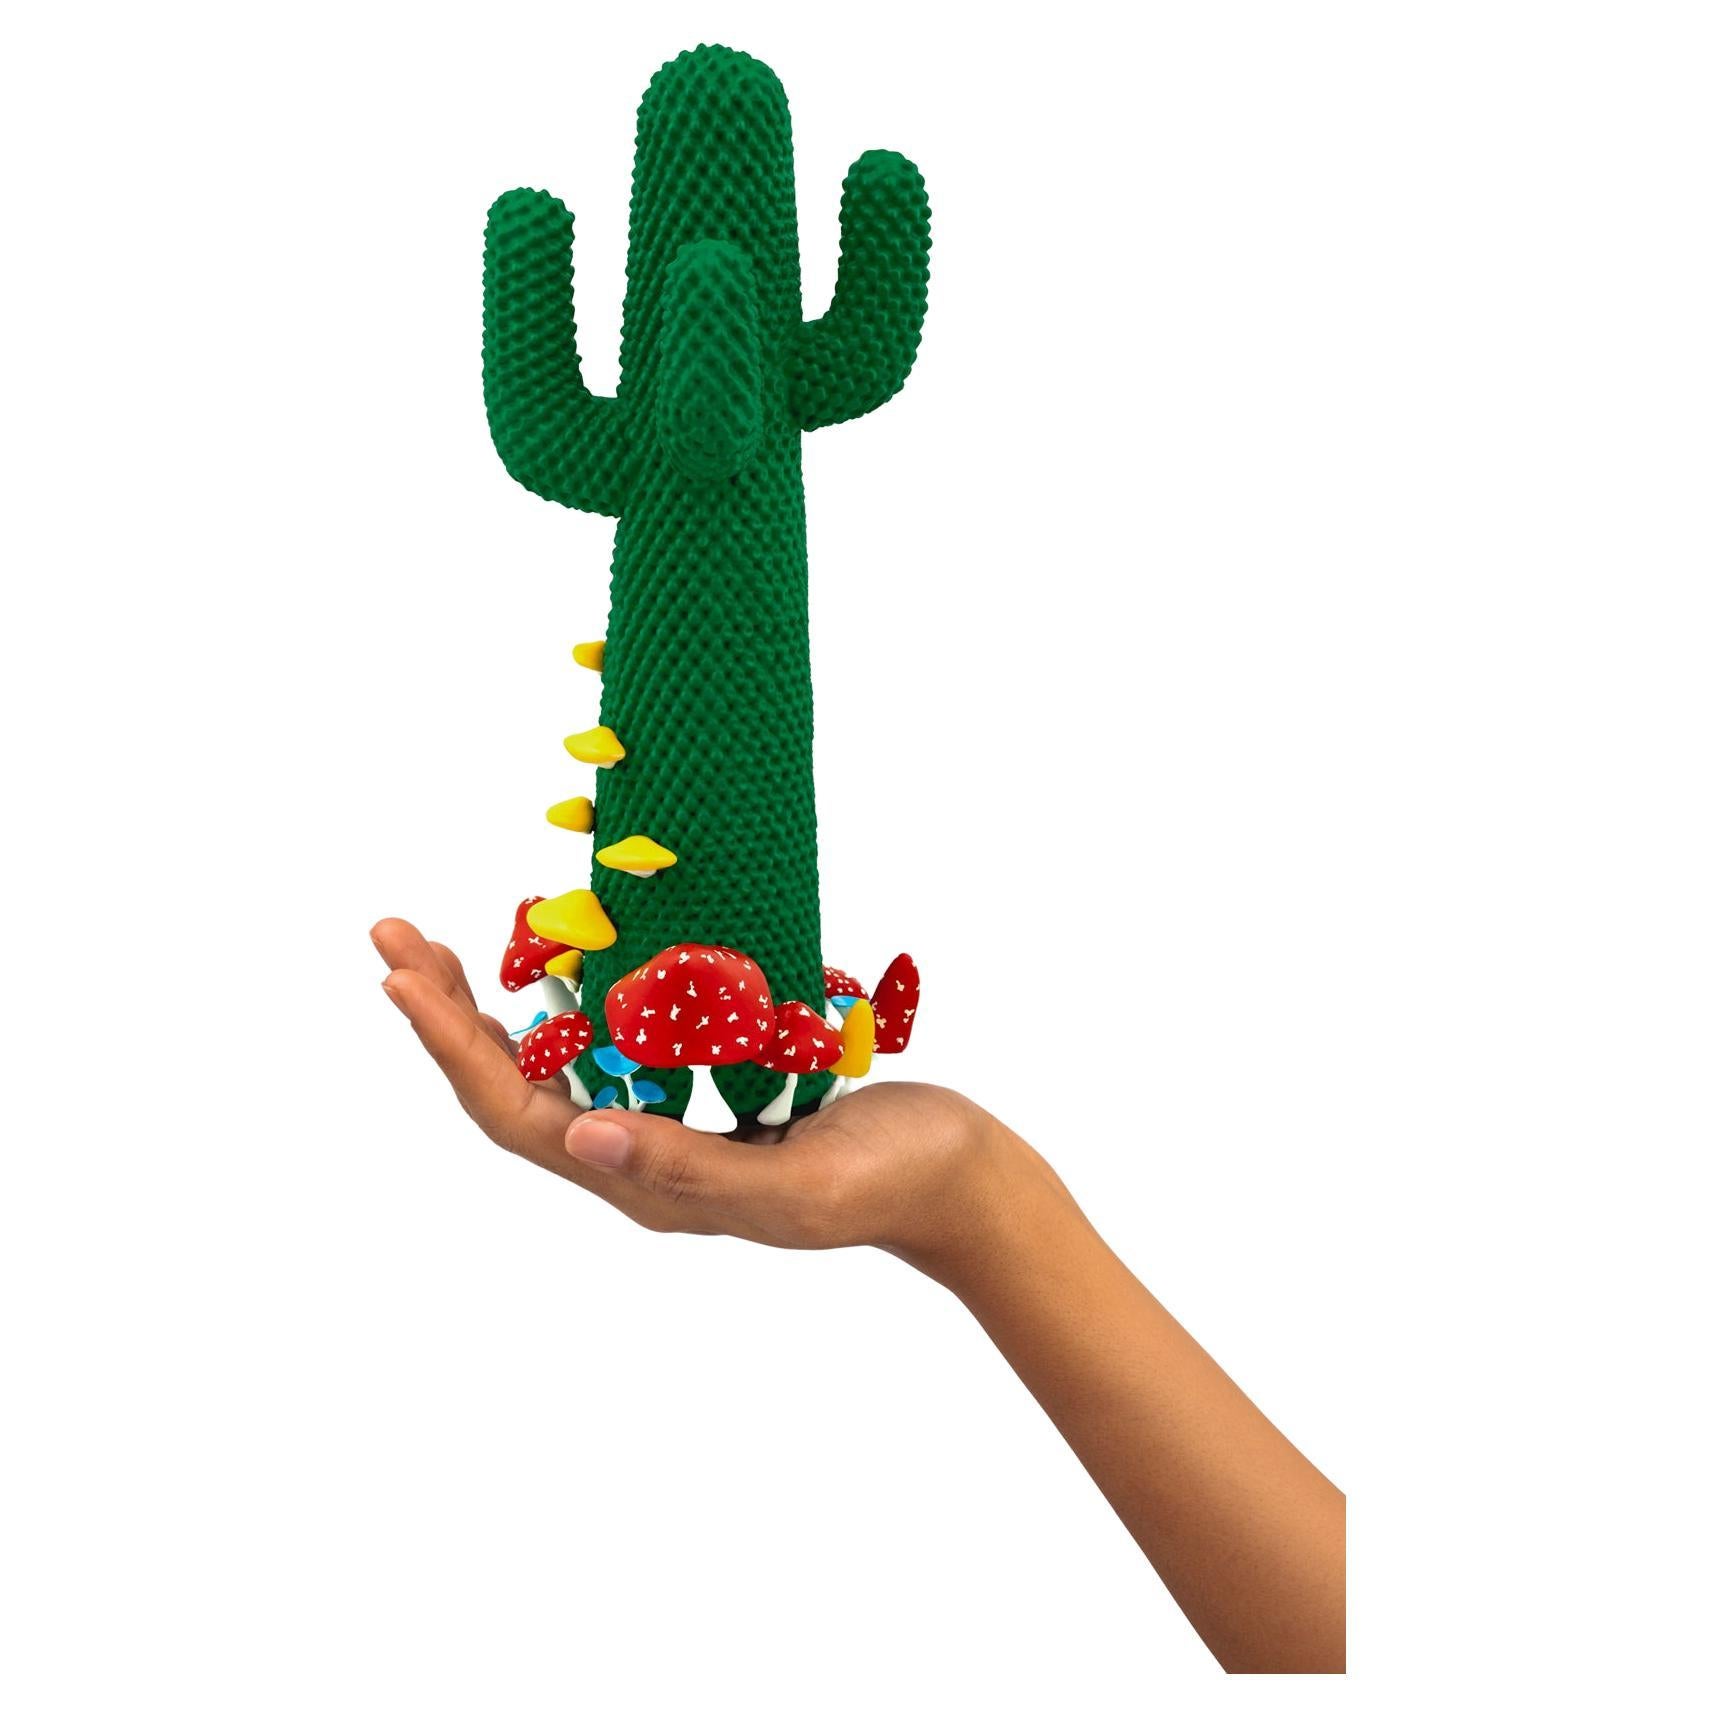 Limited Edition #59/99

Gufram presents the miniaturised version of the Shroom CACTUS® created in collaboration with A$AP Rocky and the artist’s new design studio HOMMEMADE Exactly as the real-size Shroom CACTUS®, the new Guframini piece features